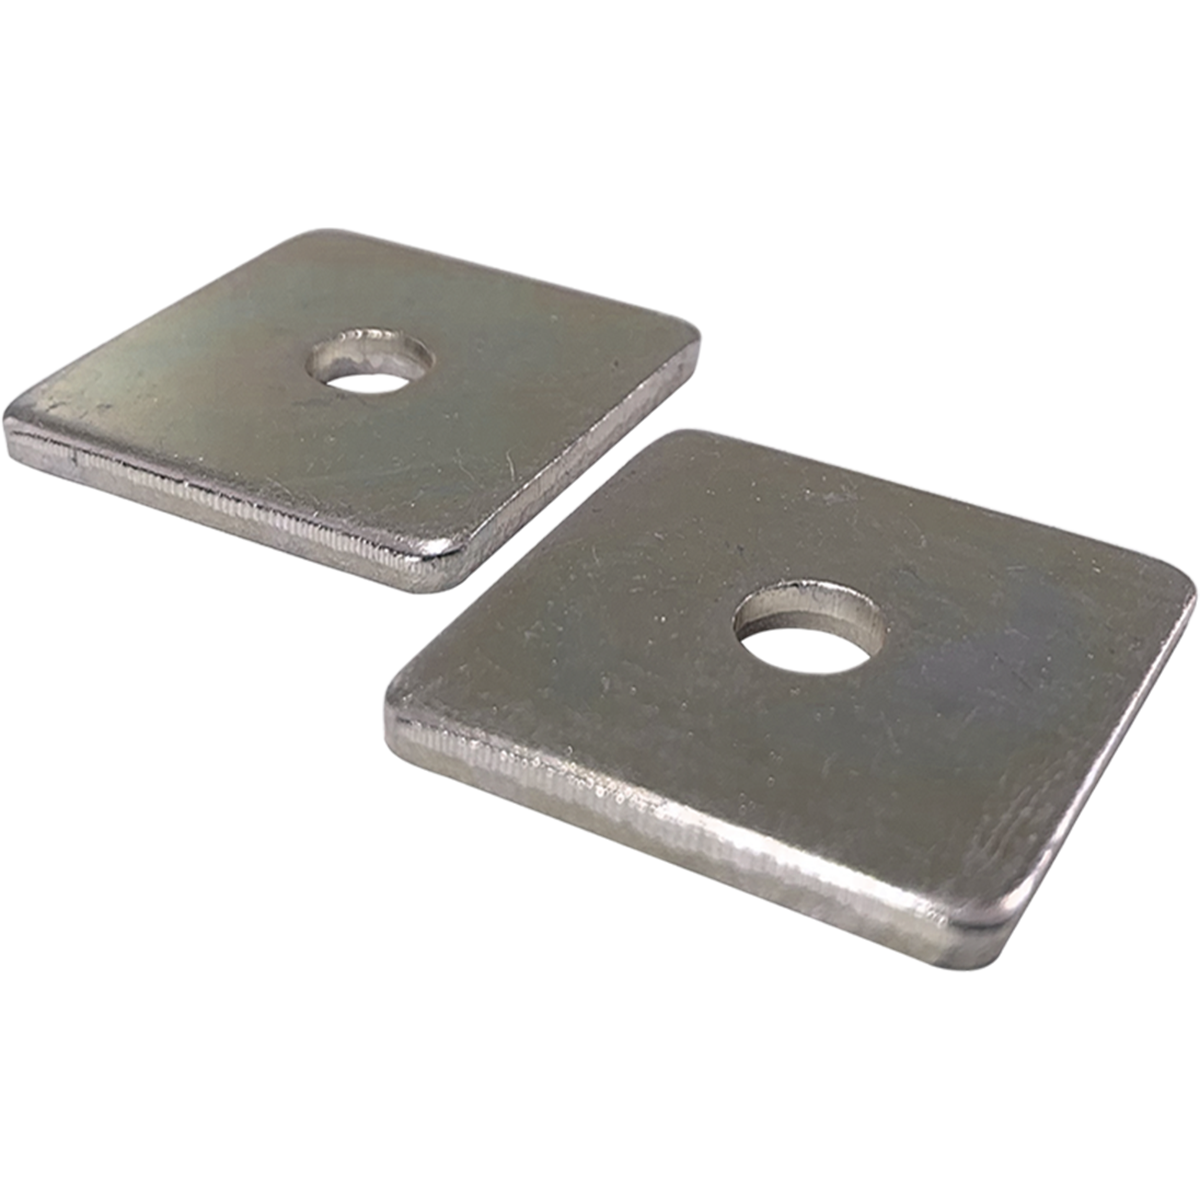 A2 stainless steel square washers available in a selection of diameters and at competitive prices.